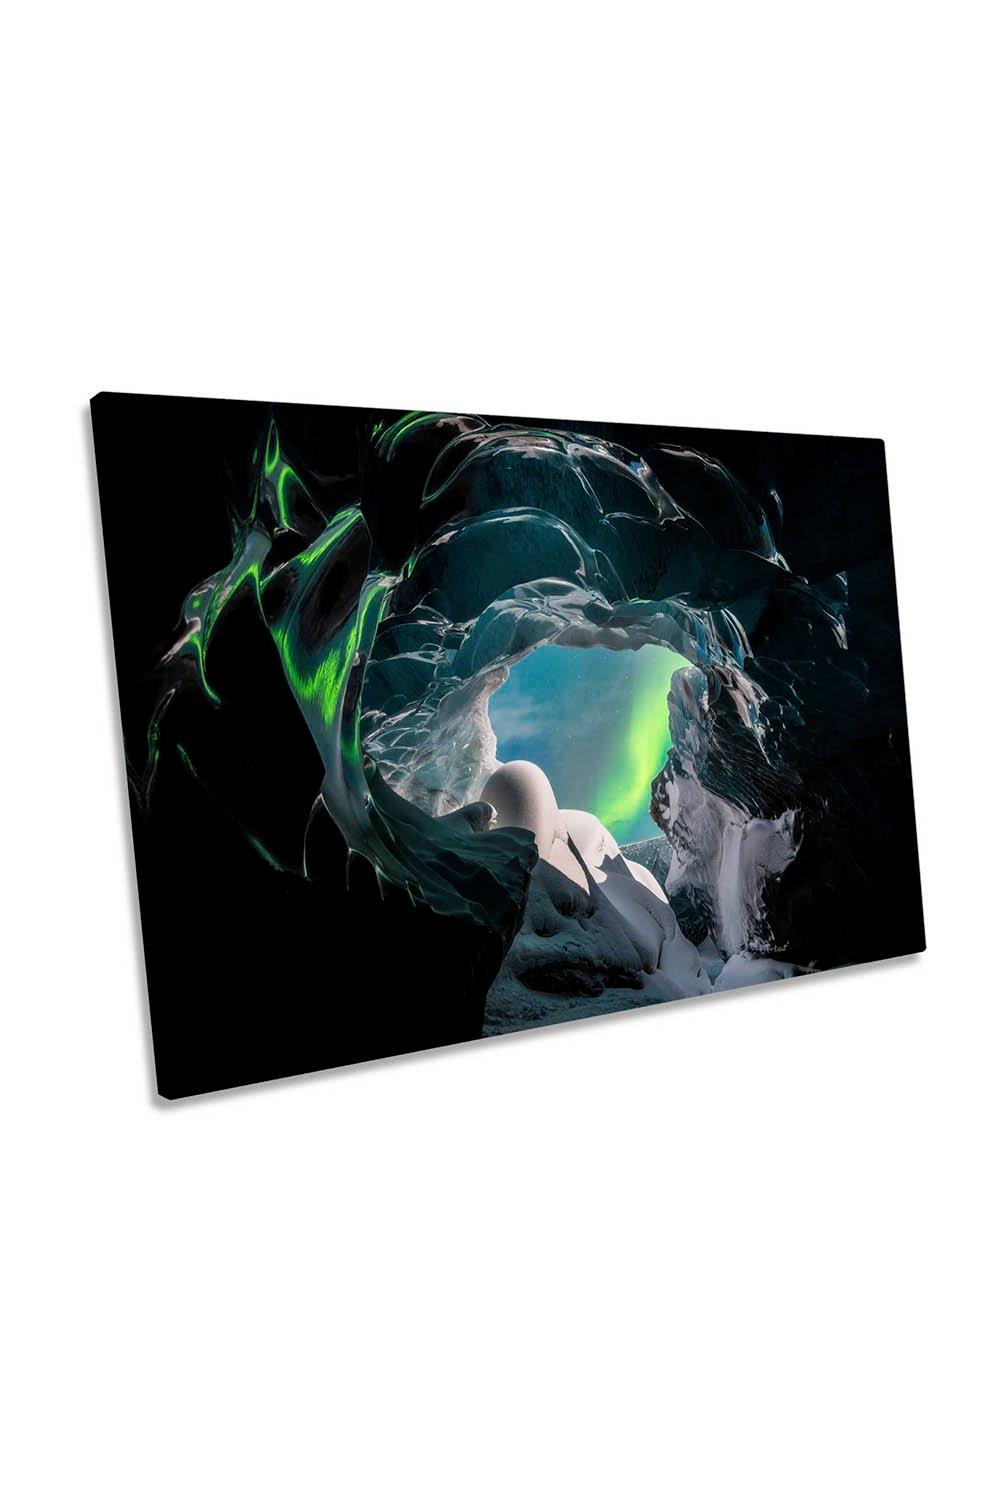 Wonders of Iceland Northern Lights Green Cave Canvas Wall Art Picture Print